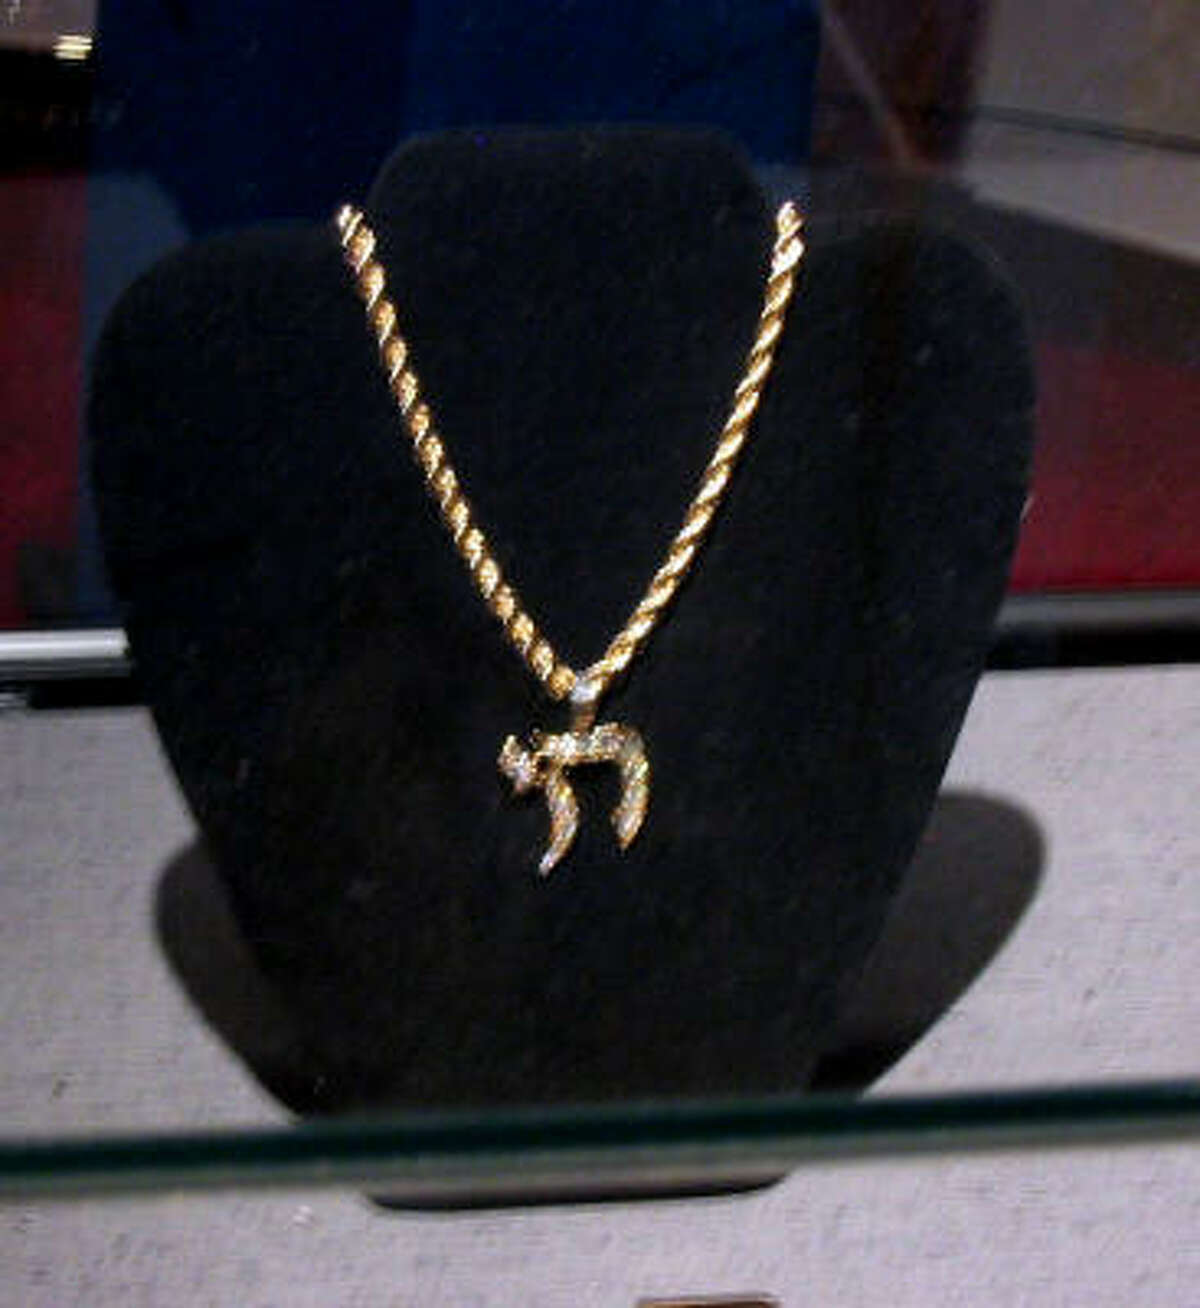 Judaism : Elvis, whose maternal grandmother was Jewish, wore a diamond-studded necklace with the Jewish letter “chai” on it, a symbol for life with God. It’s now on display in Graceland.